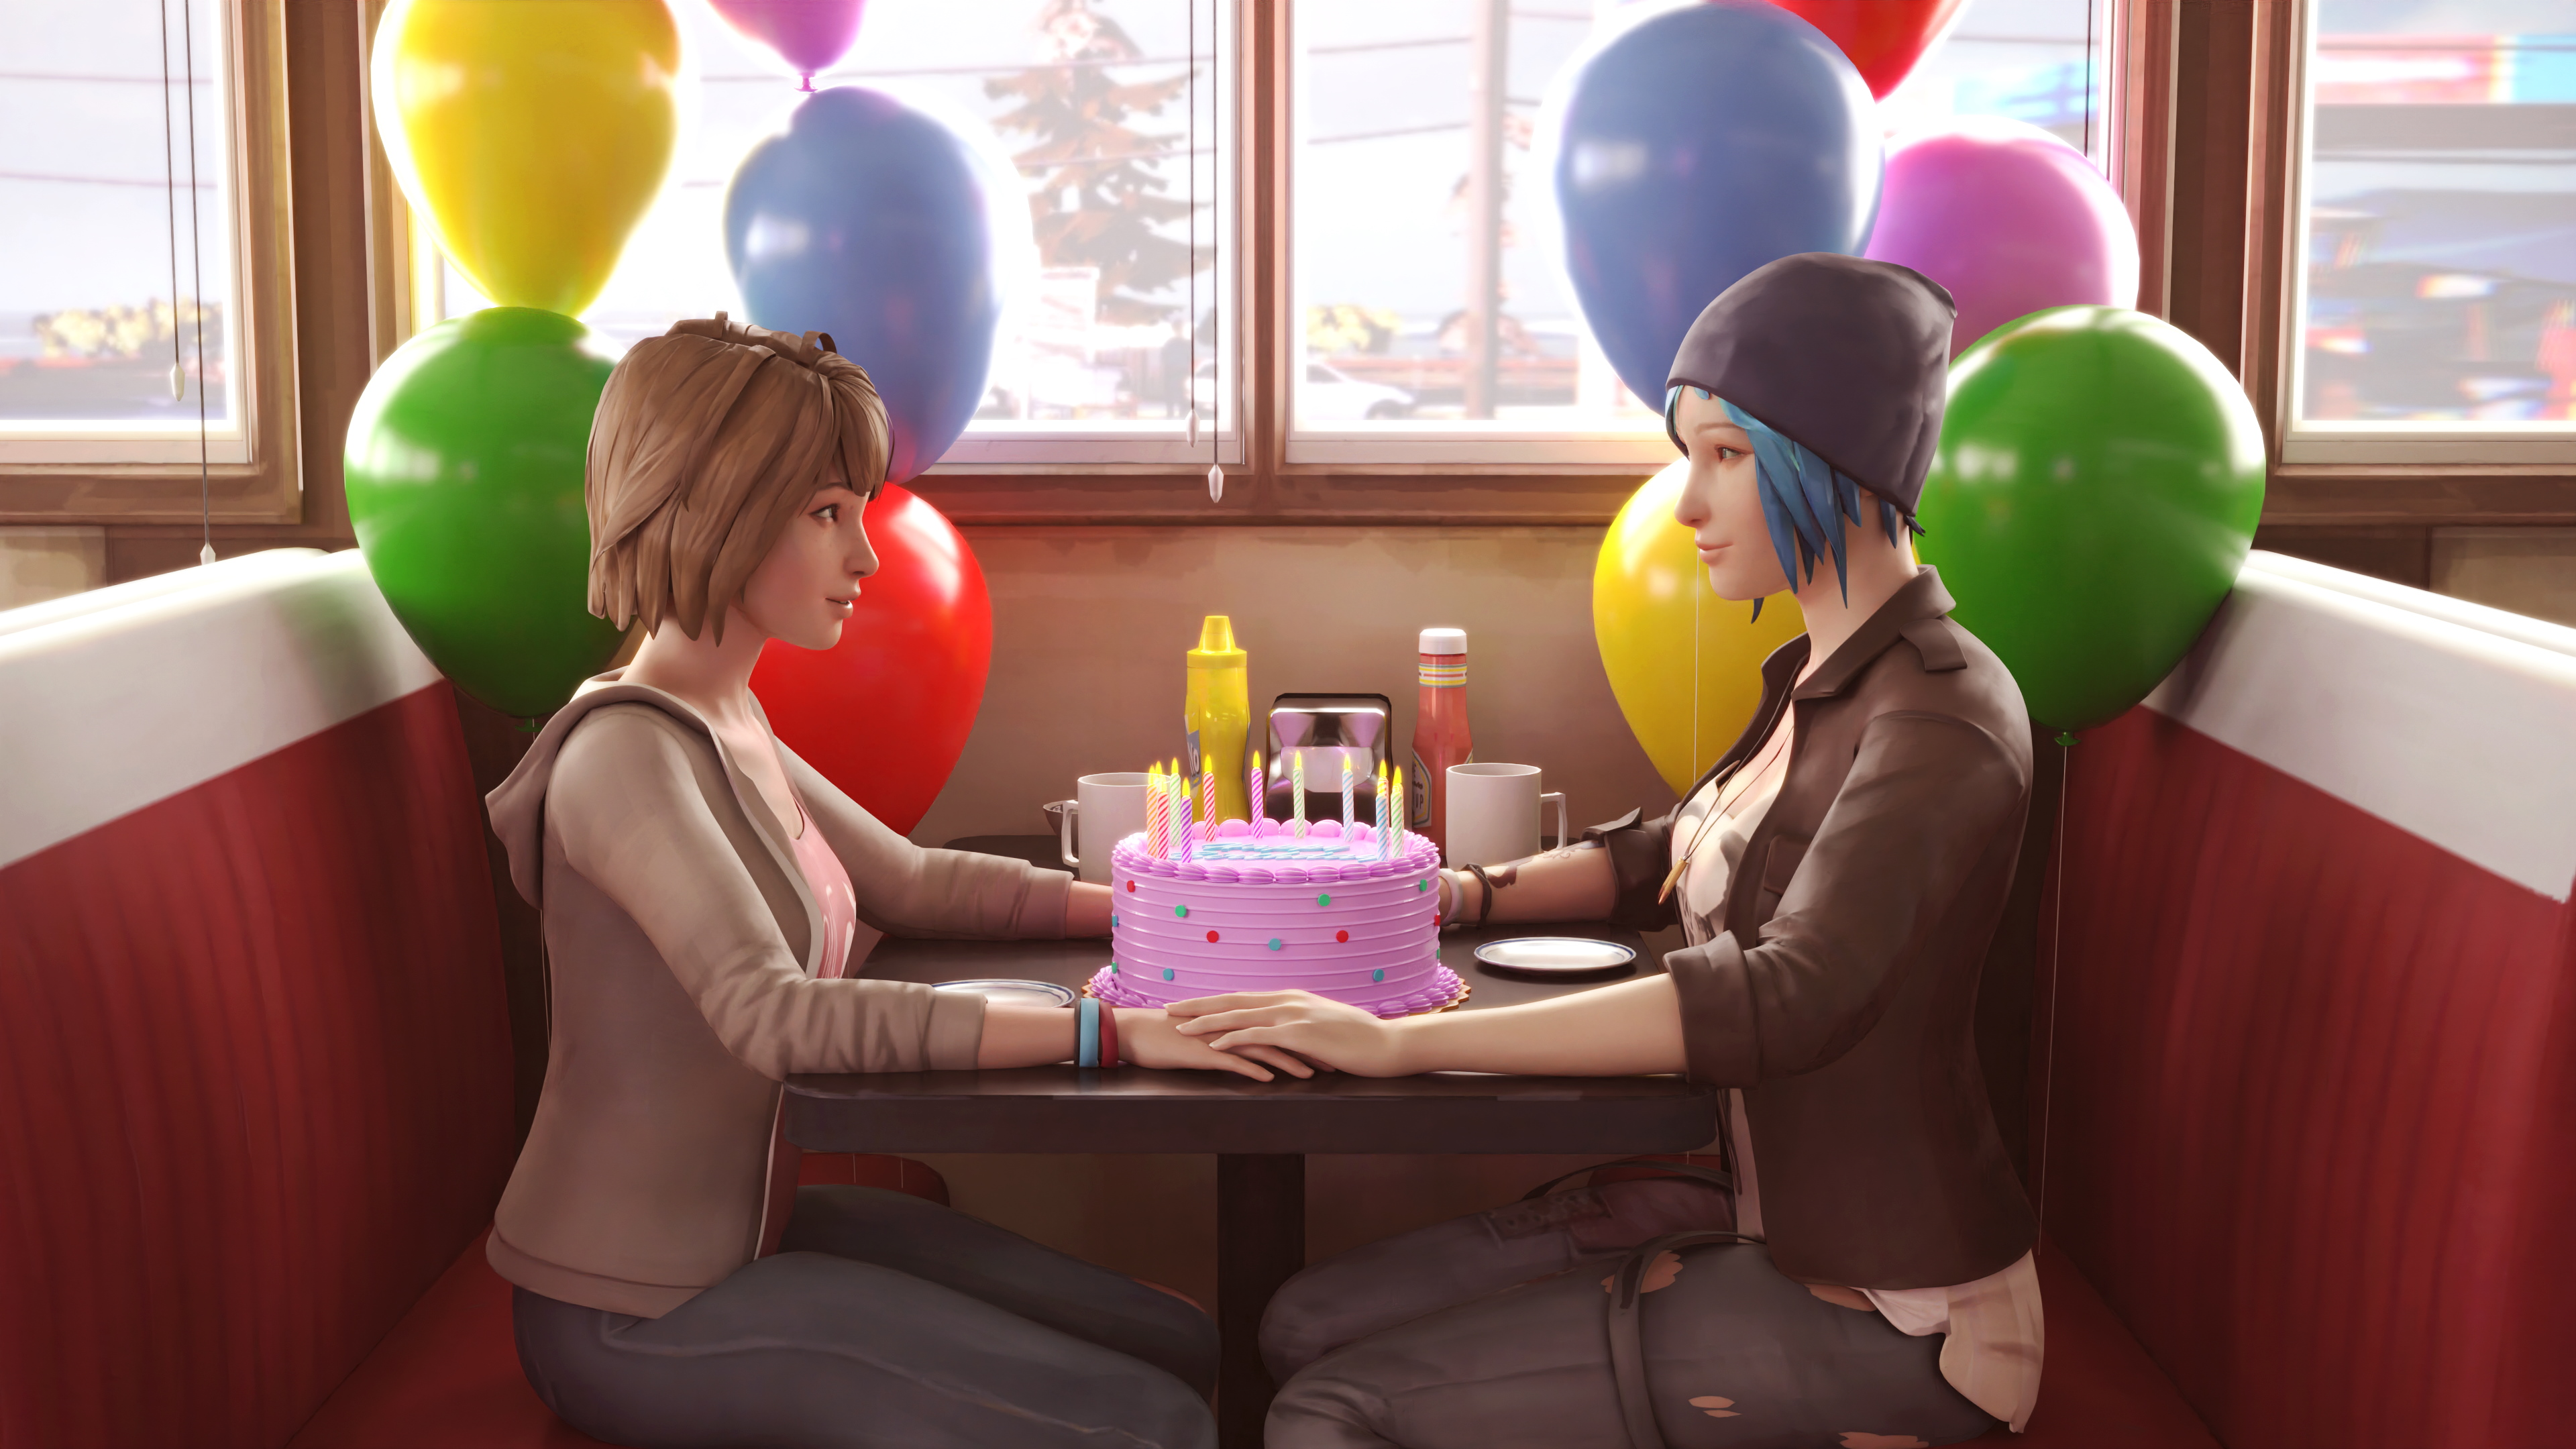 General 3840x2160 Life Is Strange Max Caulfield Chloe Price birthday cake balloon Two Whales Diner koomer women video games video game characters